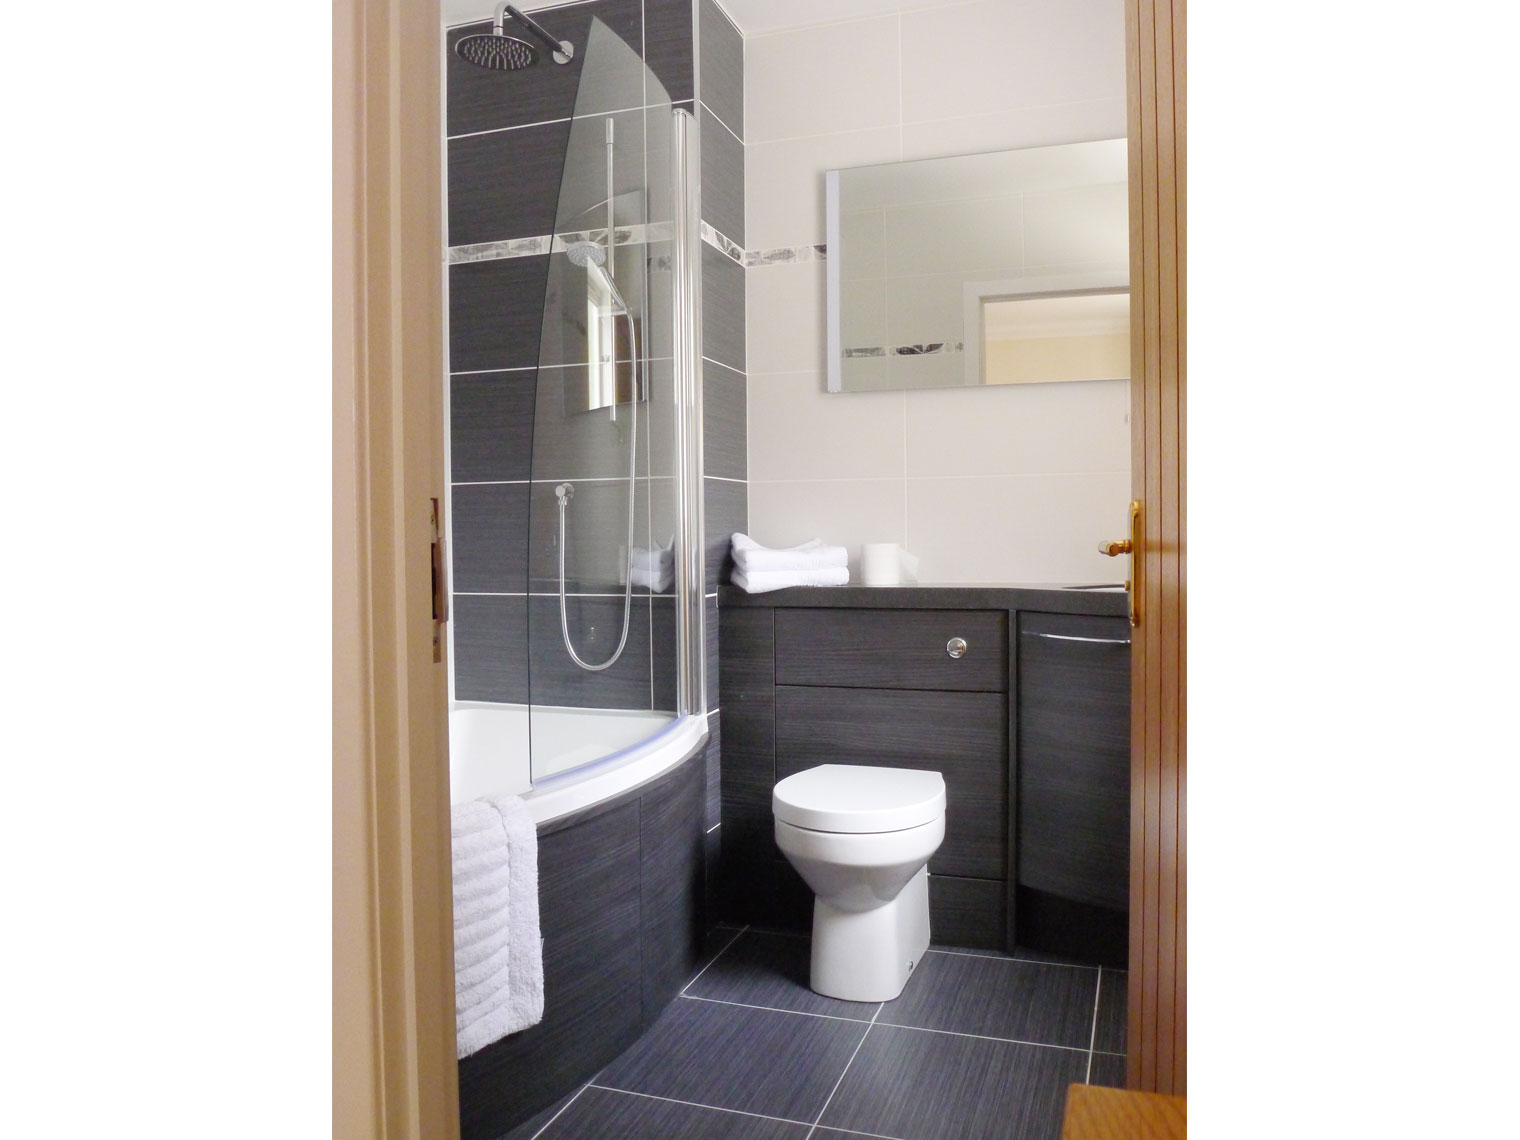 En-suite bathroom with full bath and shower